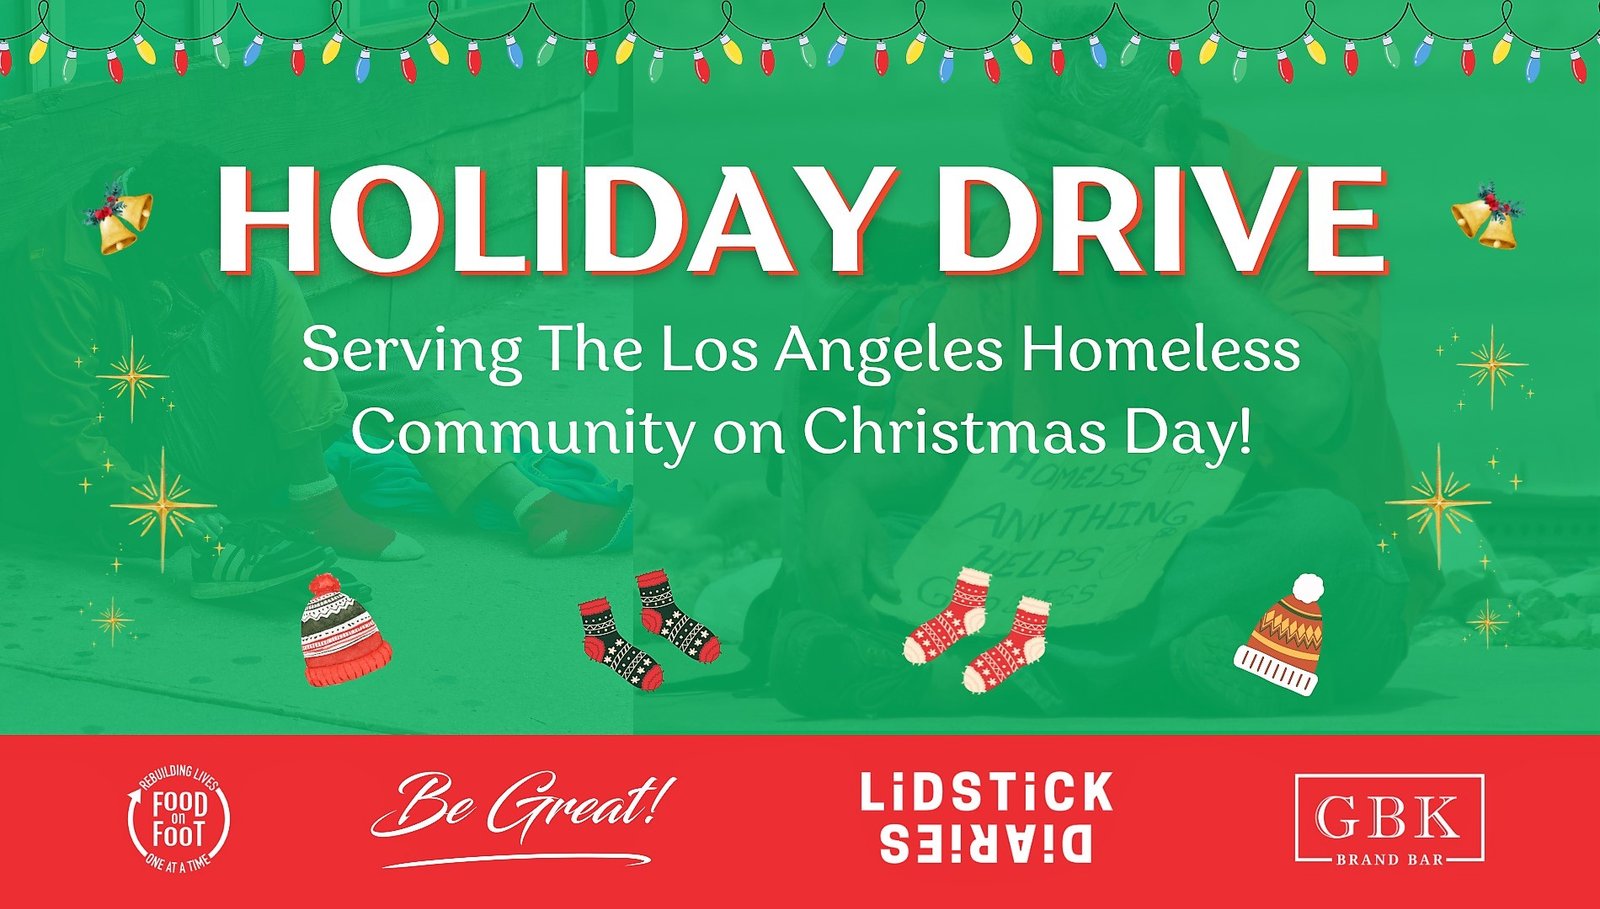 Be Great! & GBK Brand Bar Produce A Holiday Drive For The Los Angeles